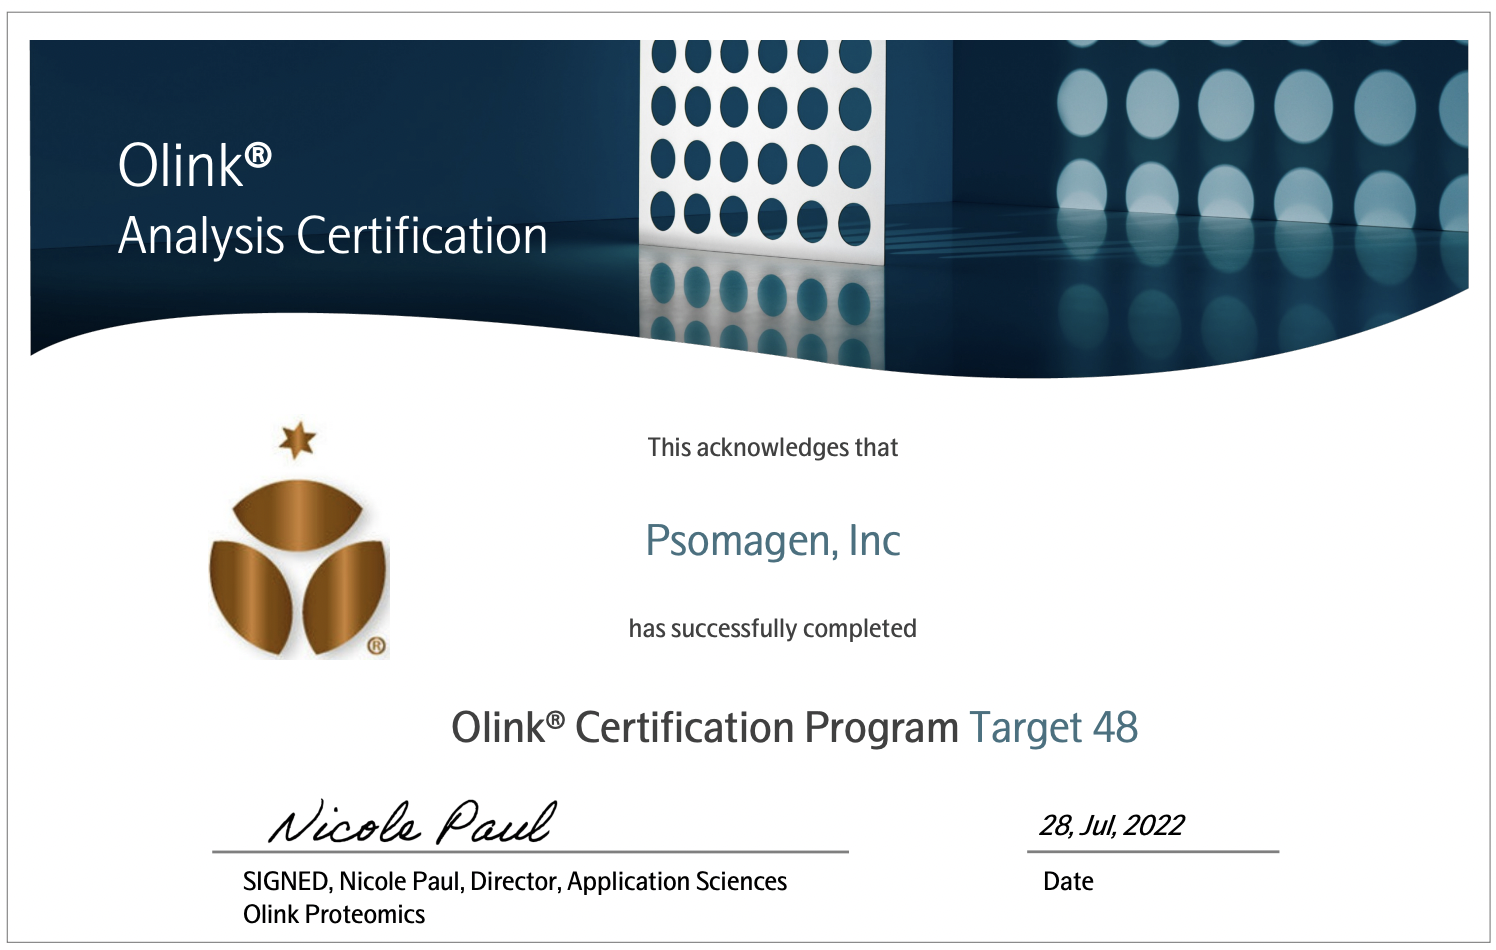 Ollink® Certification - Target 48 acquired August 2022